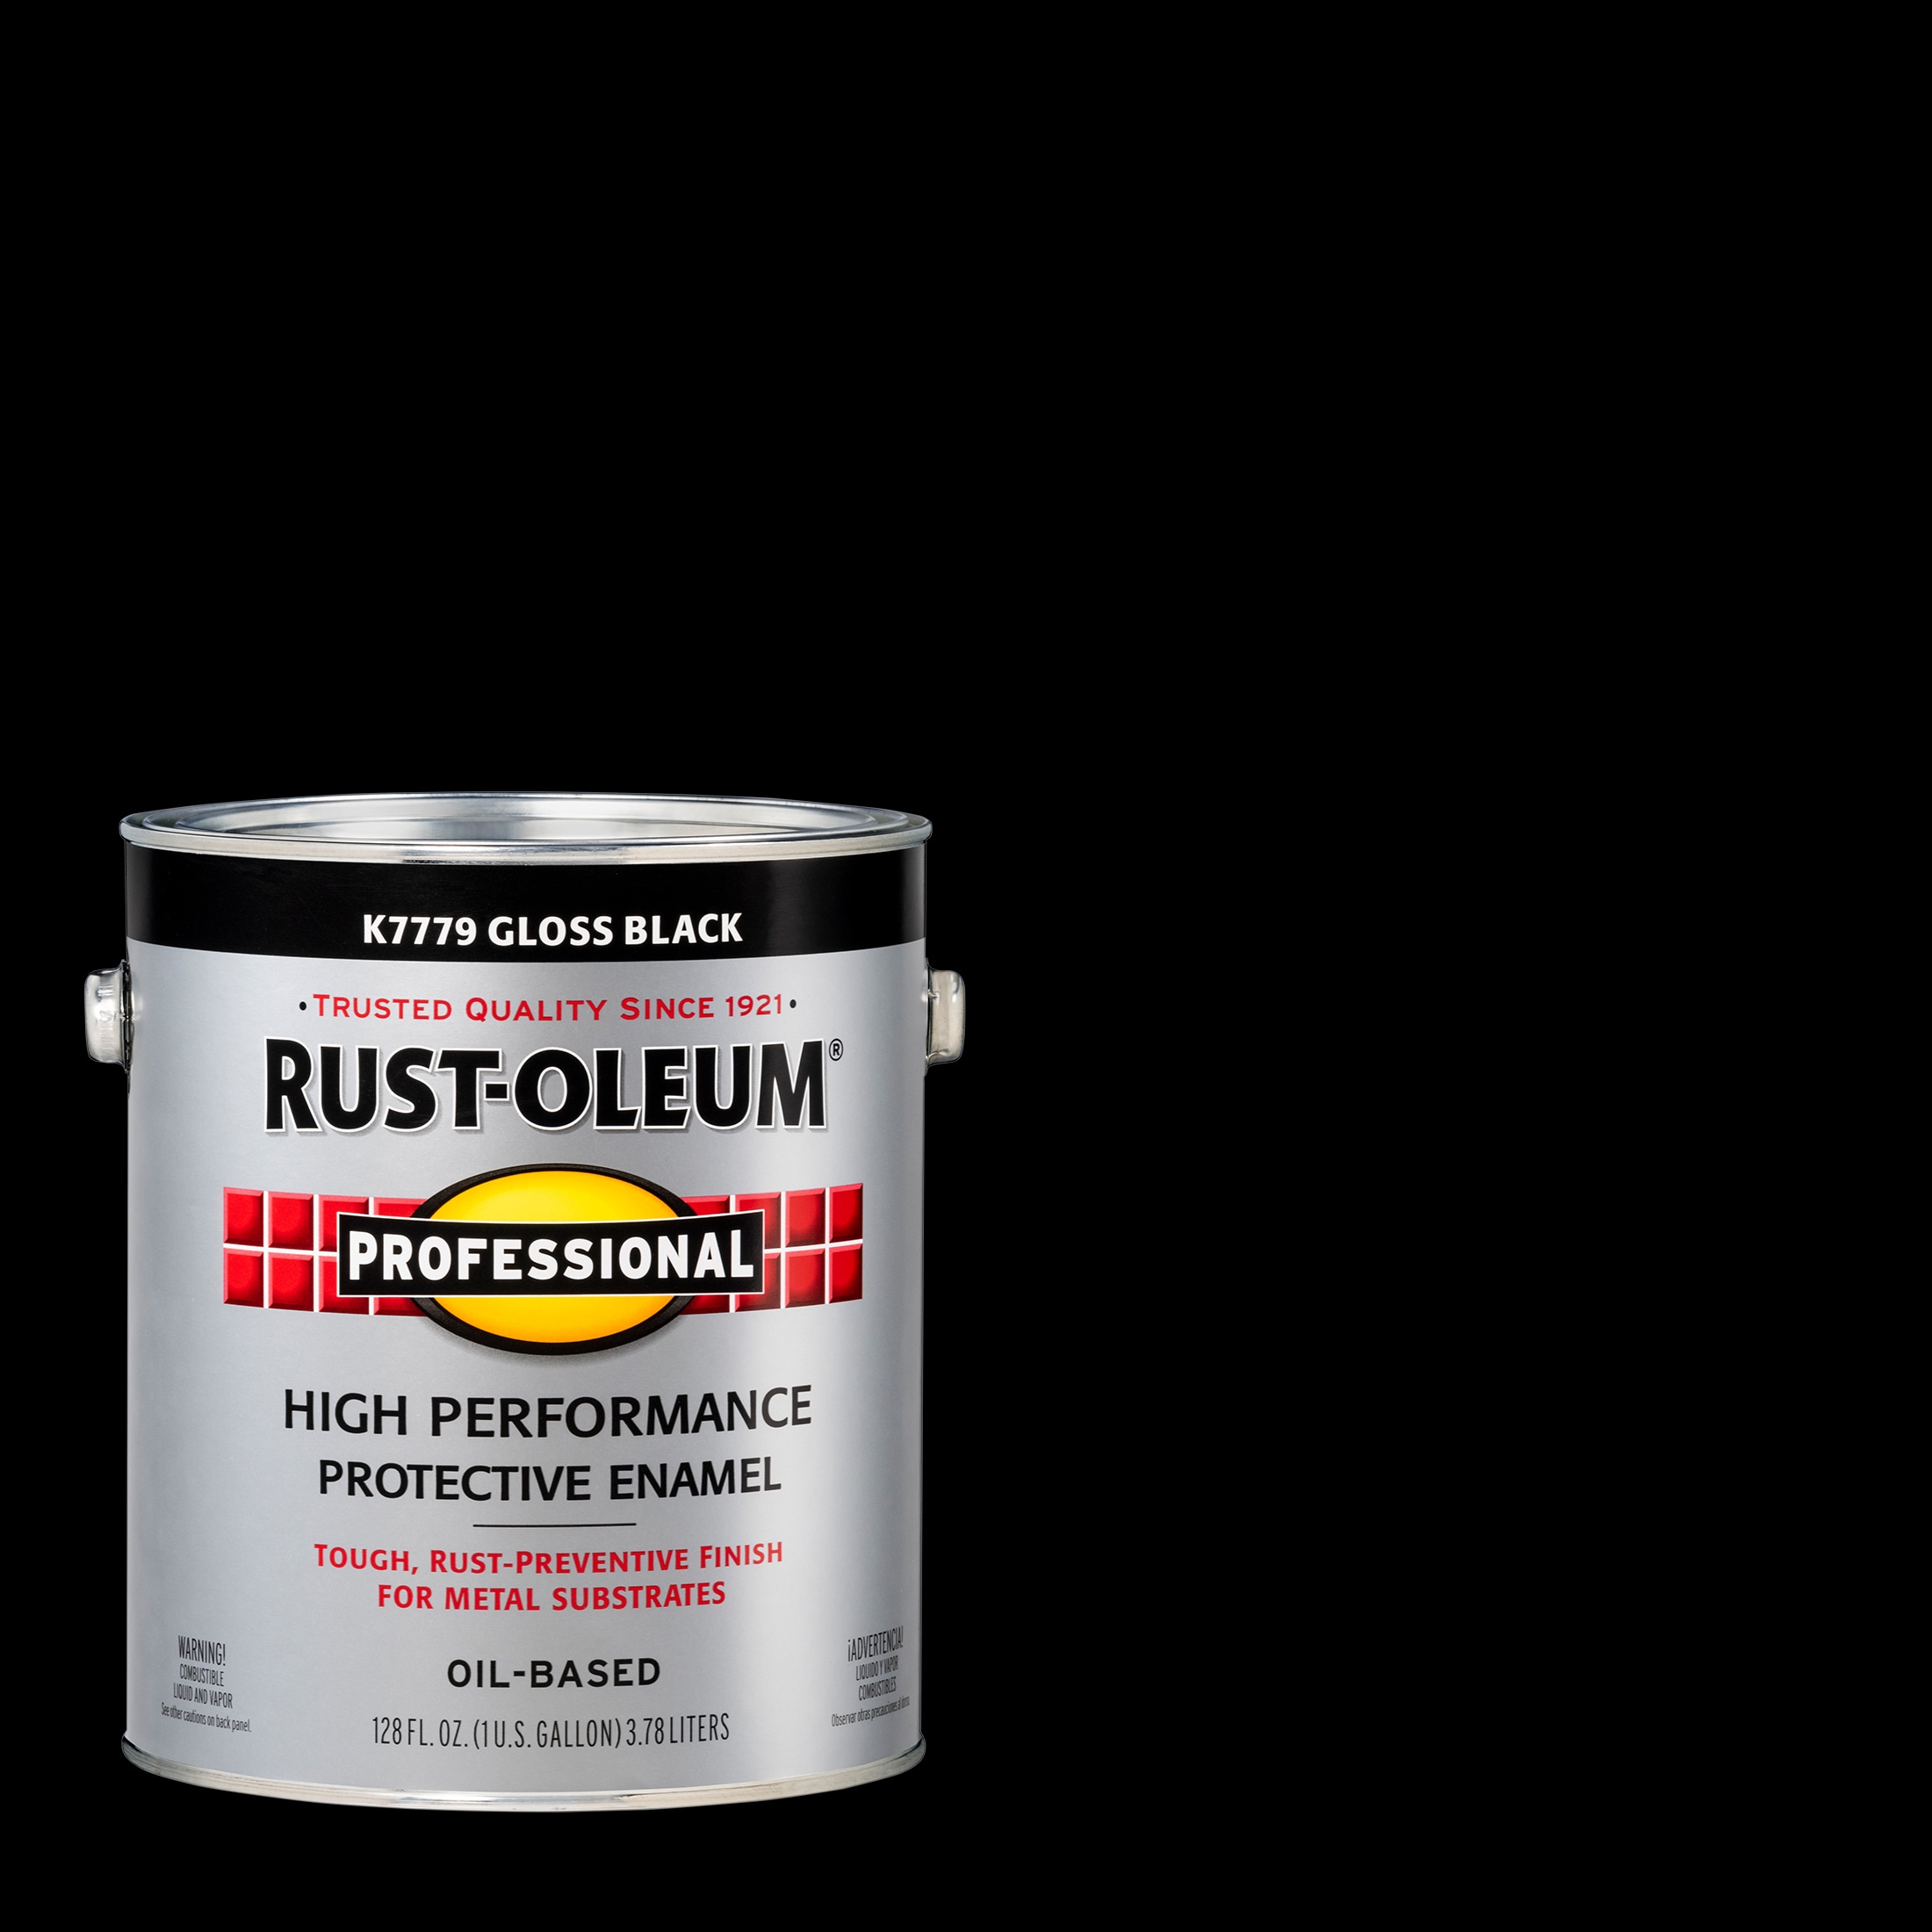 Rust-Oleum Professional 1 gal. High Performance Protective Enamel Gloss  Black Oil-Based Interior/Exterior Paint 7779402 - The Home Depot